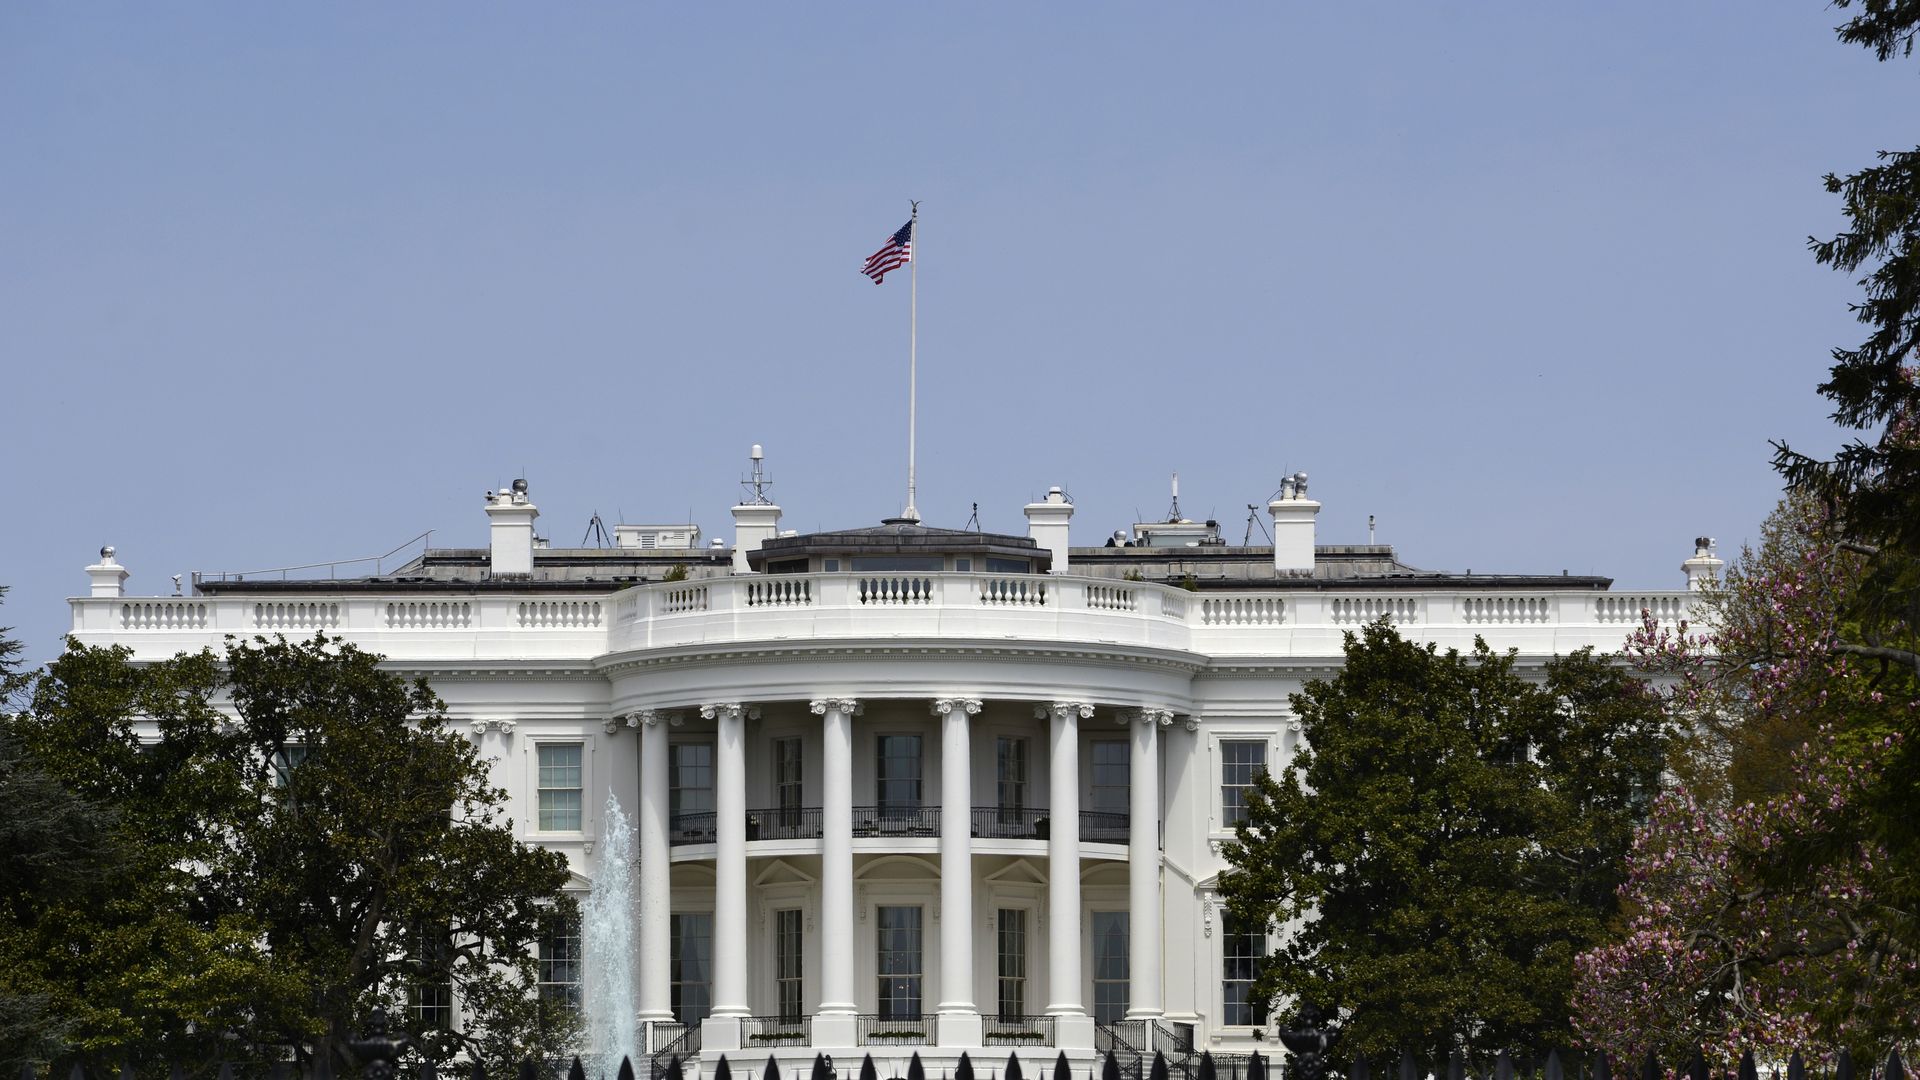 The White House exterior is pictured